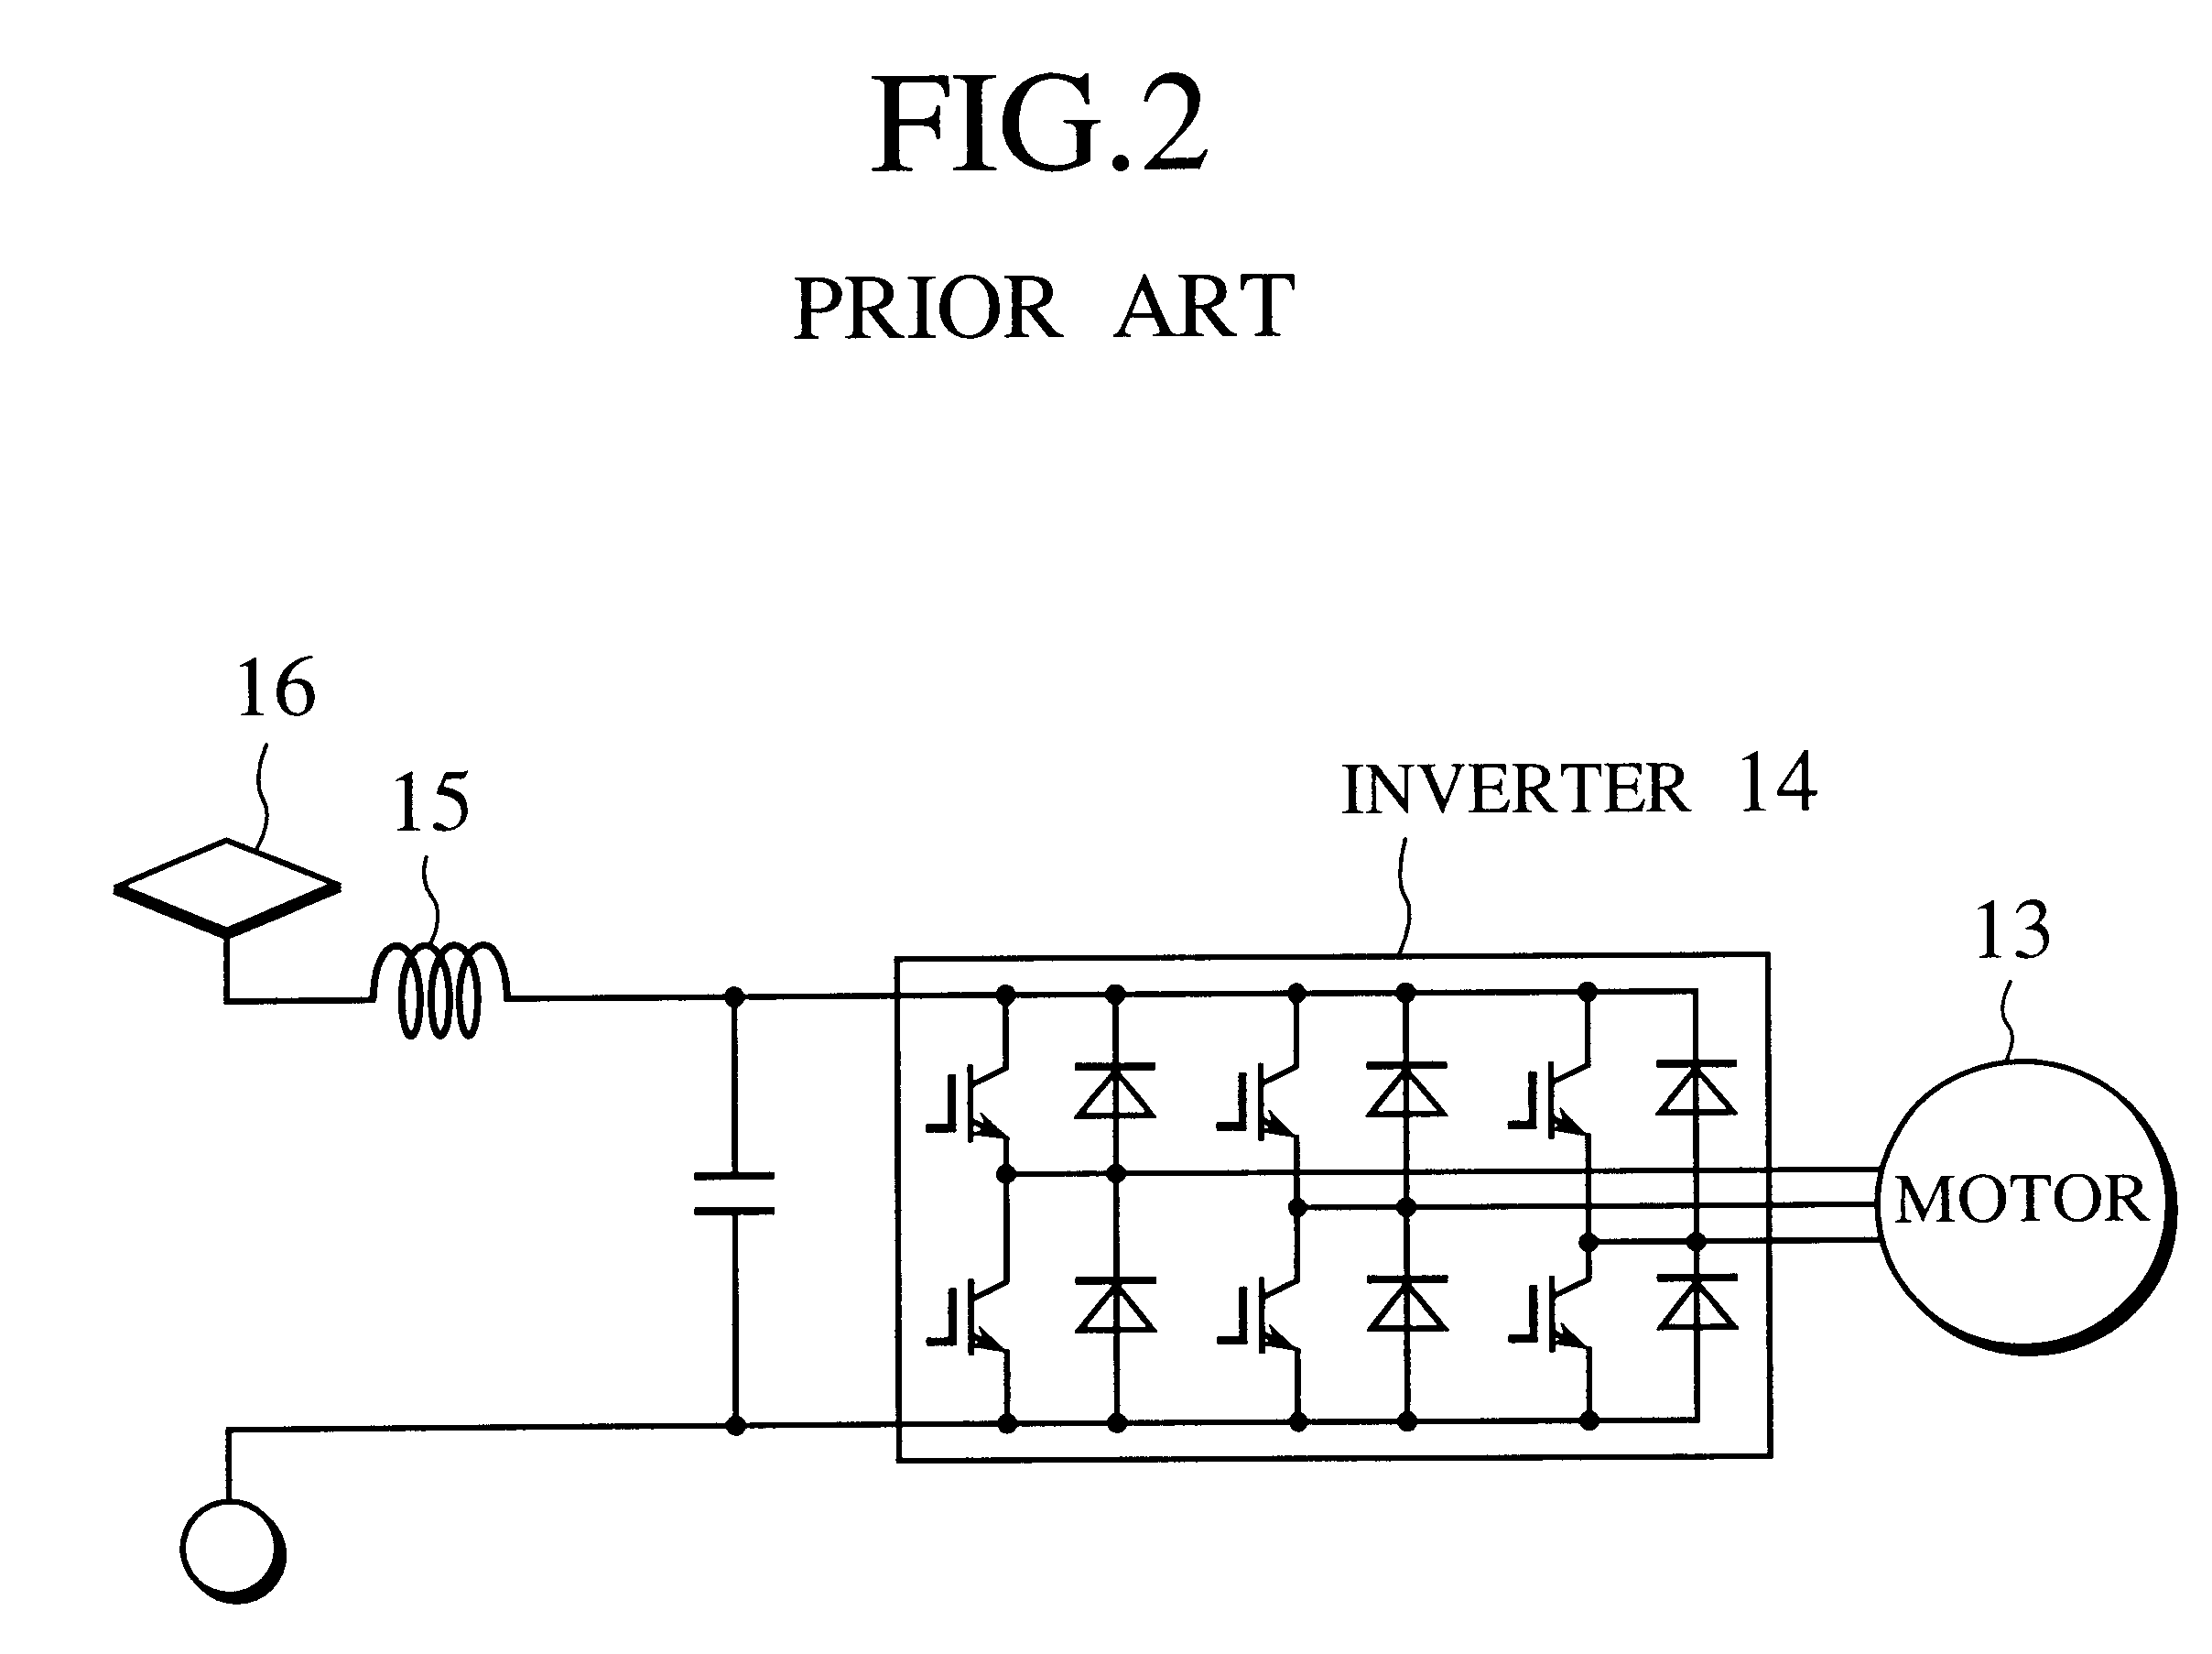 Apparatus for driving electric car by inverter-controlled motor through gear mechanism